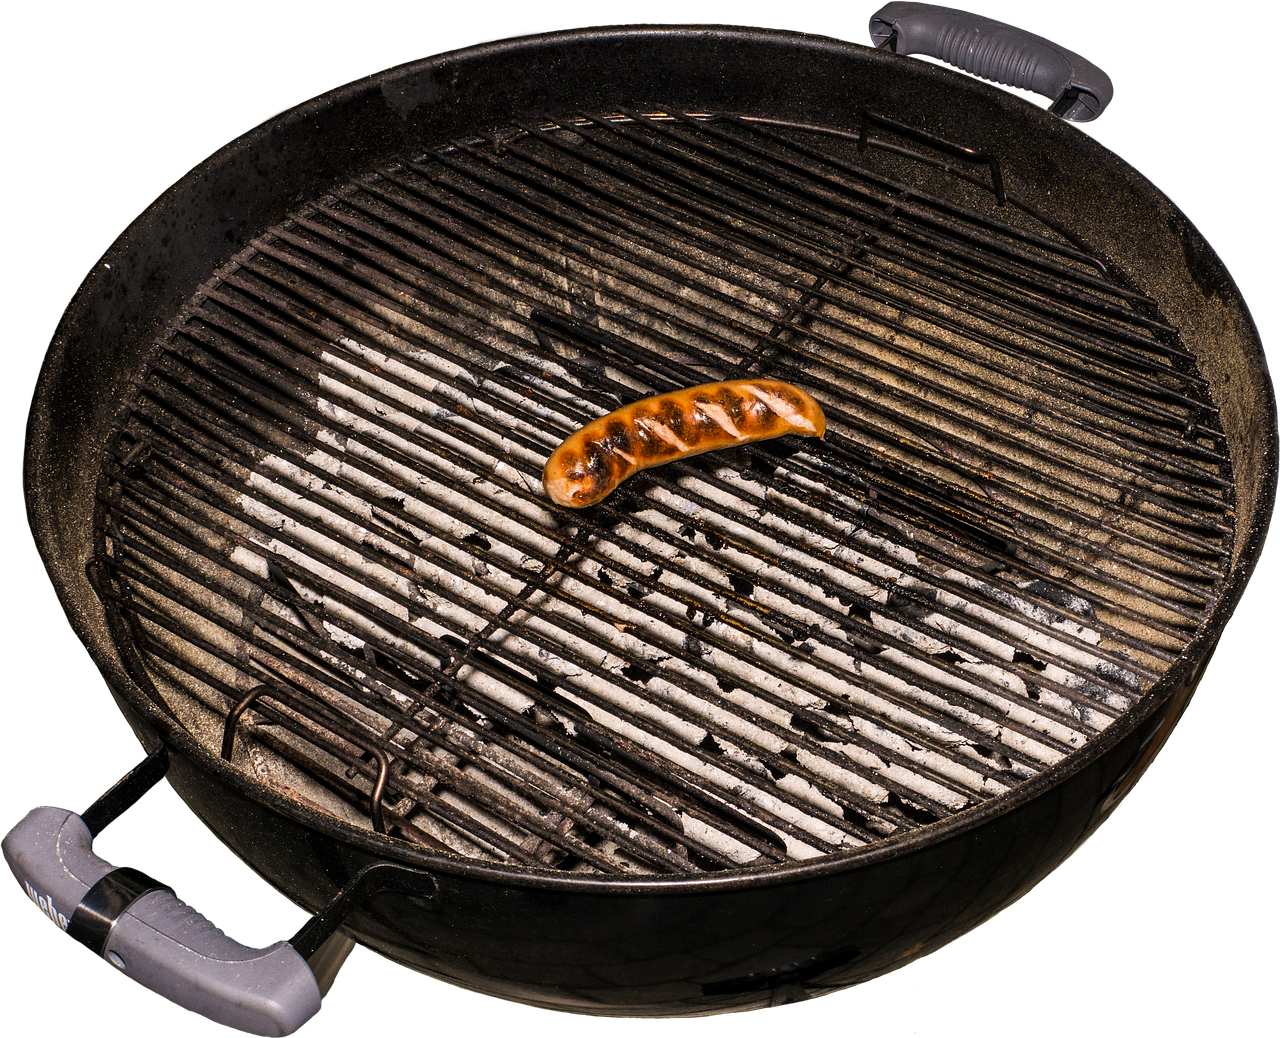 grill, sausage, grill proof-2435331.jpg